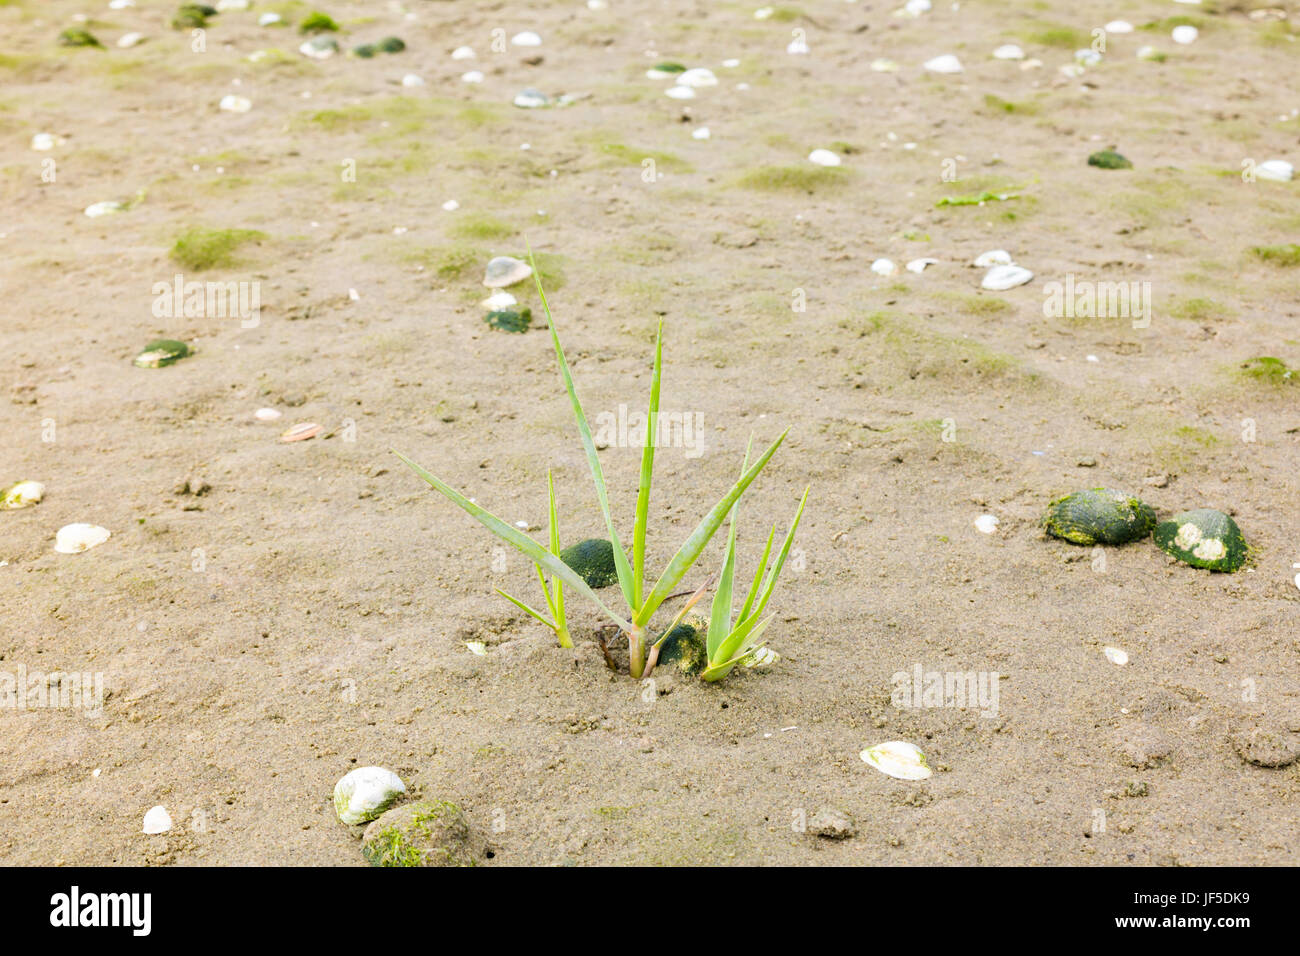 Sand with shells and single young plant of marram grass growing on beach at seaside, Netherlands Stock Photo